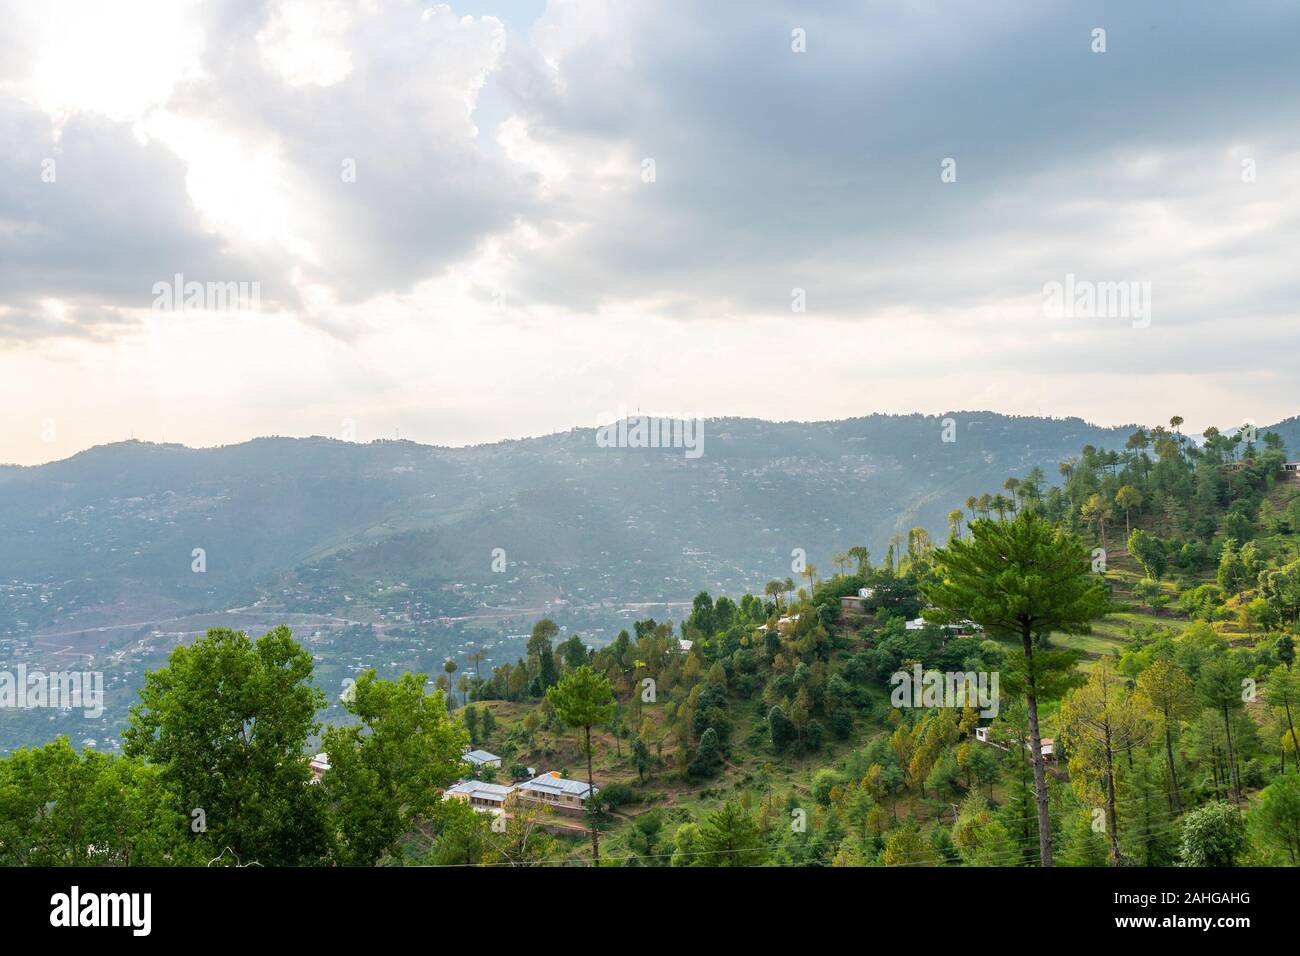 Islamabad Murree Mountain Resort Picturesque Breathtaking Landscape View on a Sunny Blue Sky Day Stock Photo